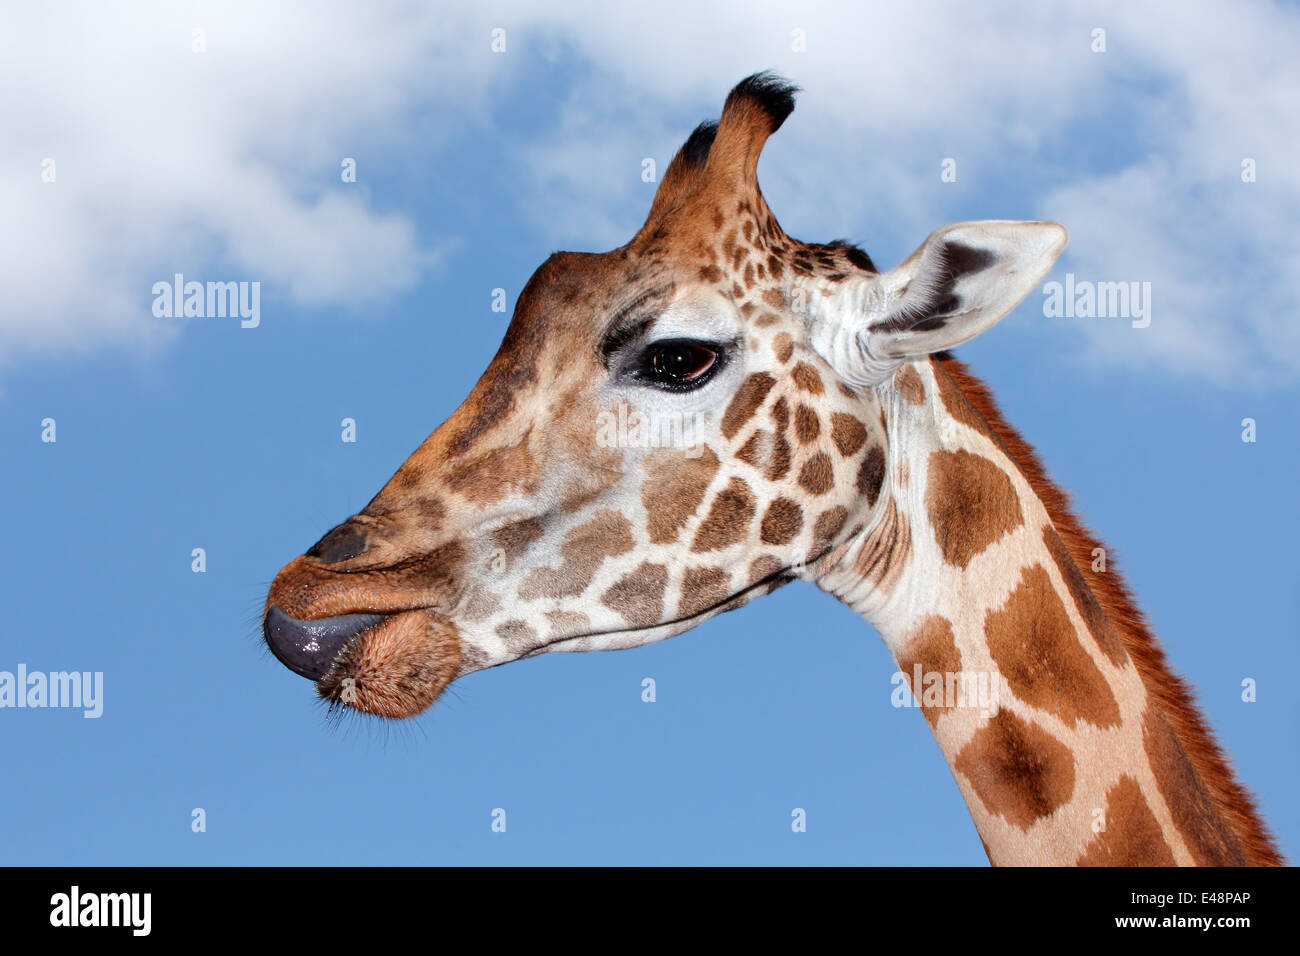 Portrait of a giraffe (Giraffa camelopardalis) against a blue sky with clouds Stock Photo